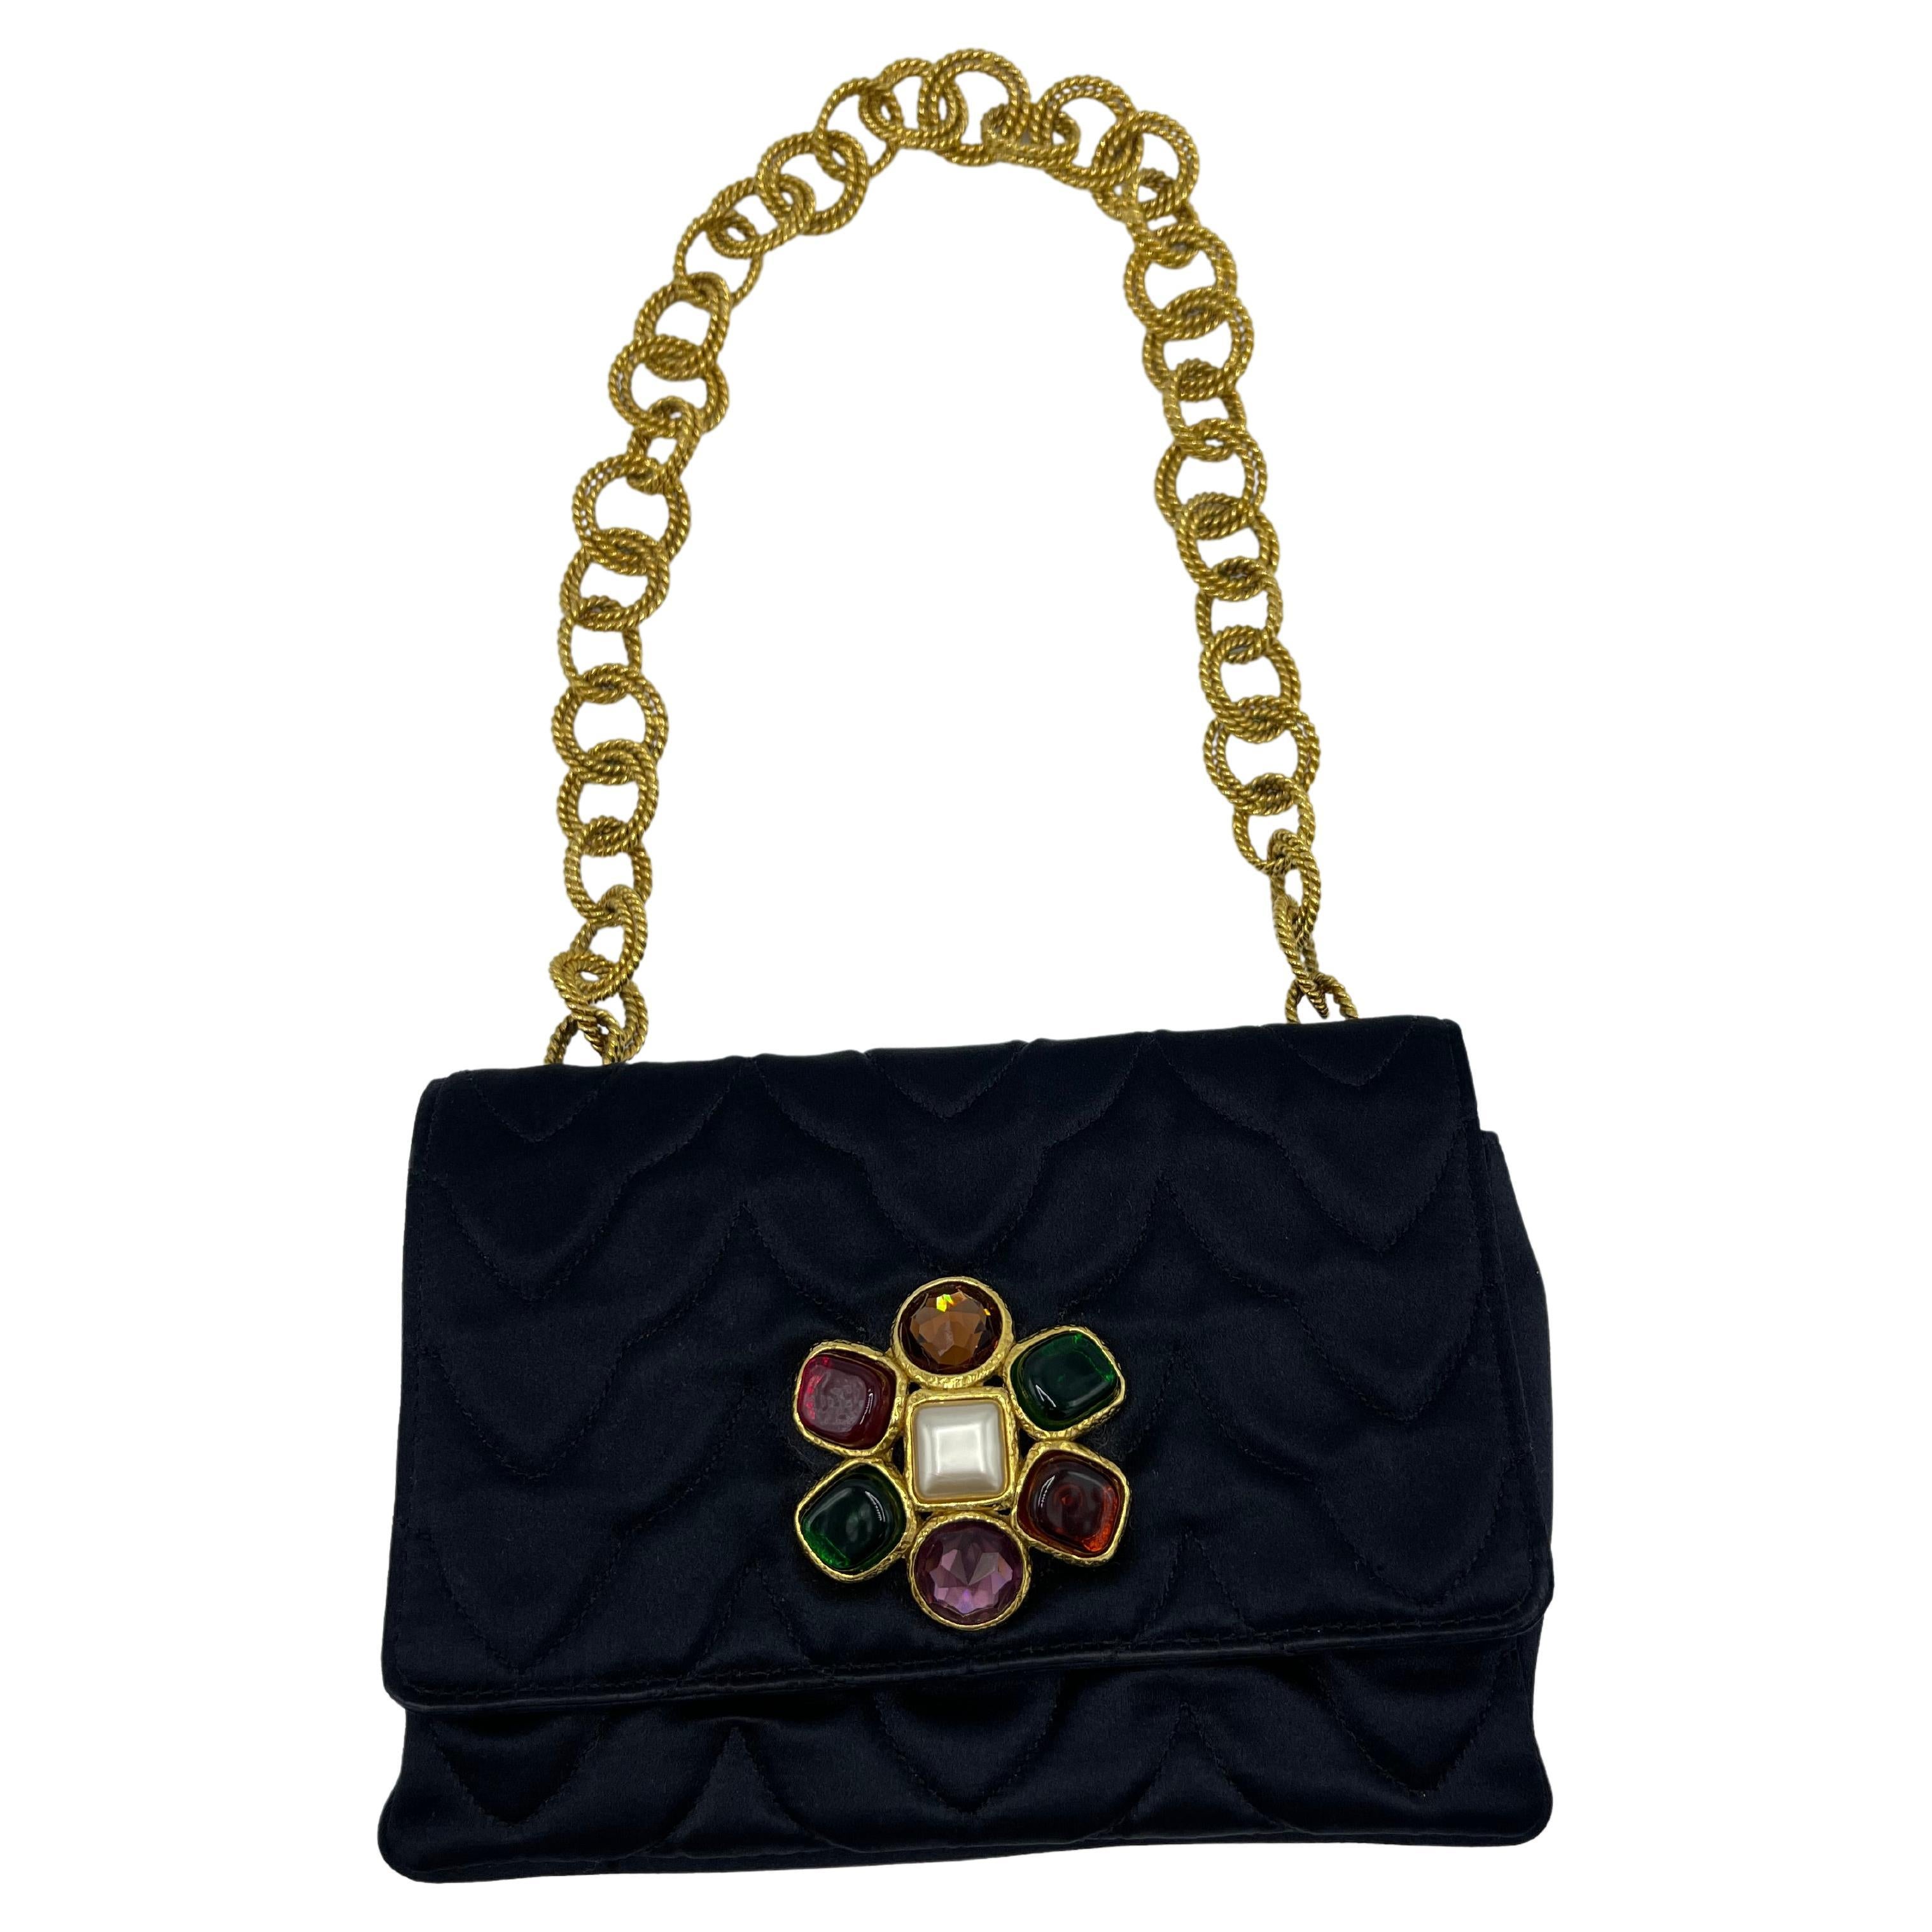 Rare Chanel Gripoix collectable bag. In perfect condition. The purse is made of satin, the chain strap is constructed of doubled circular and oval links, each link is in a rope design in gold. 
In the front of the bag we can see a Gripoix